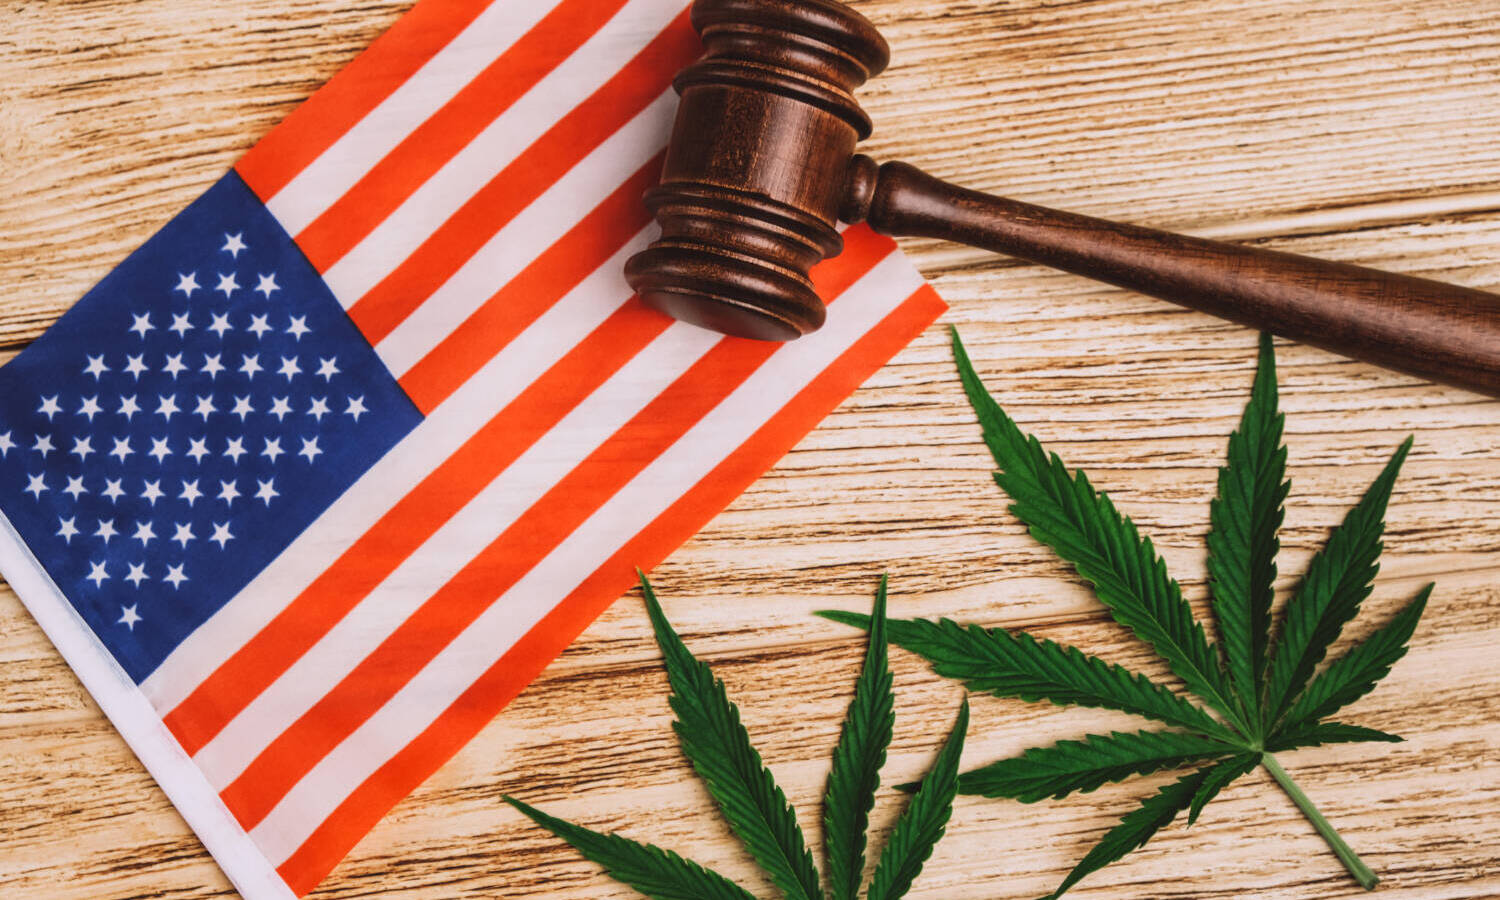 Virginia Lawmakers Come Up With New Way To Punish Cannabis Consumers, And More Marijuana News